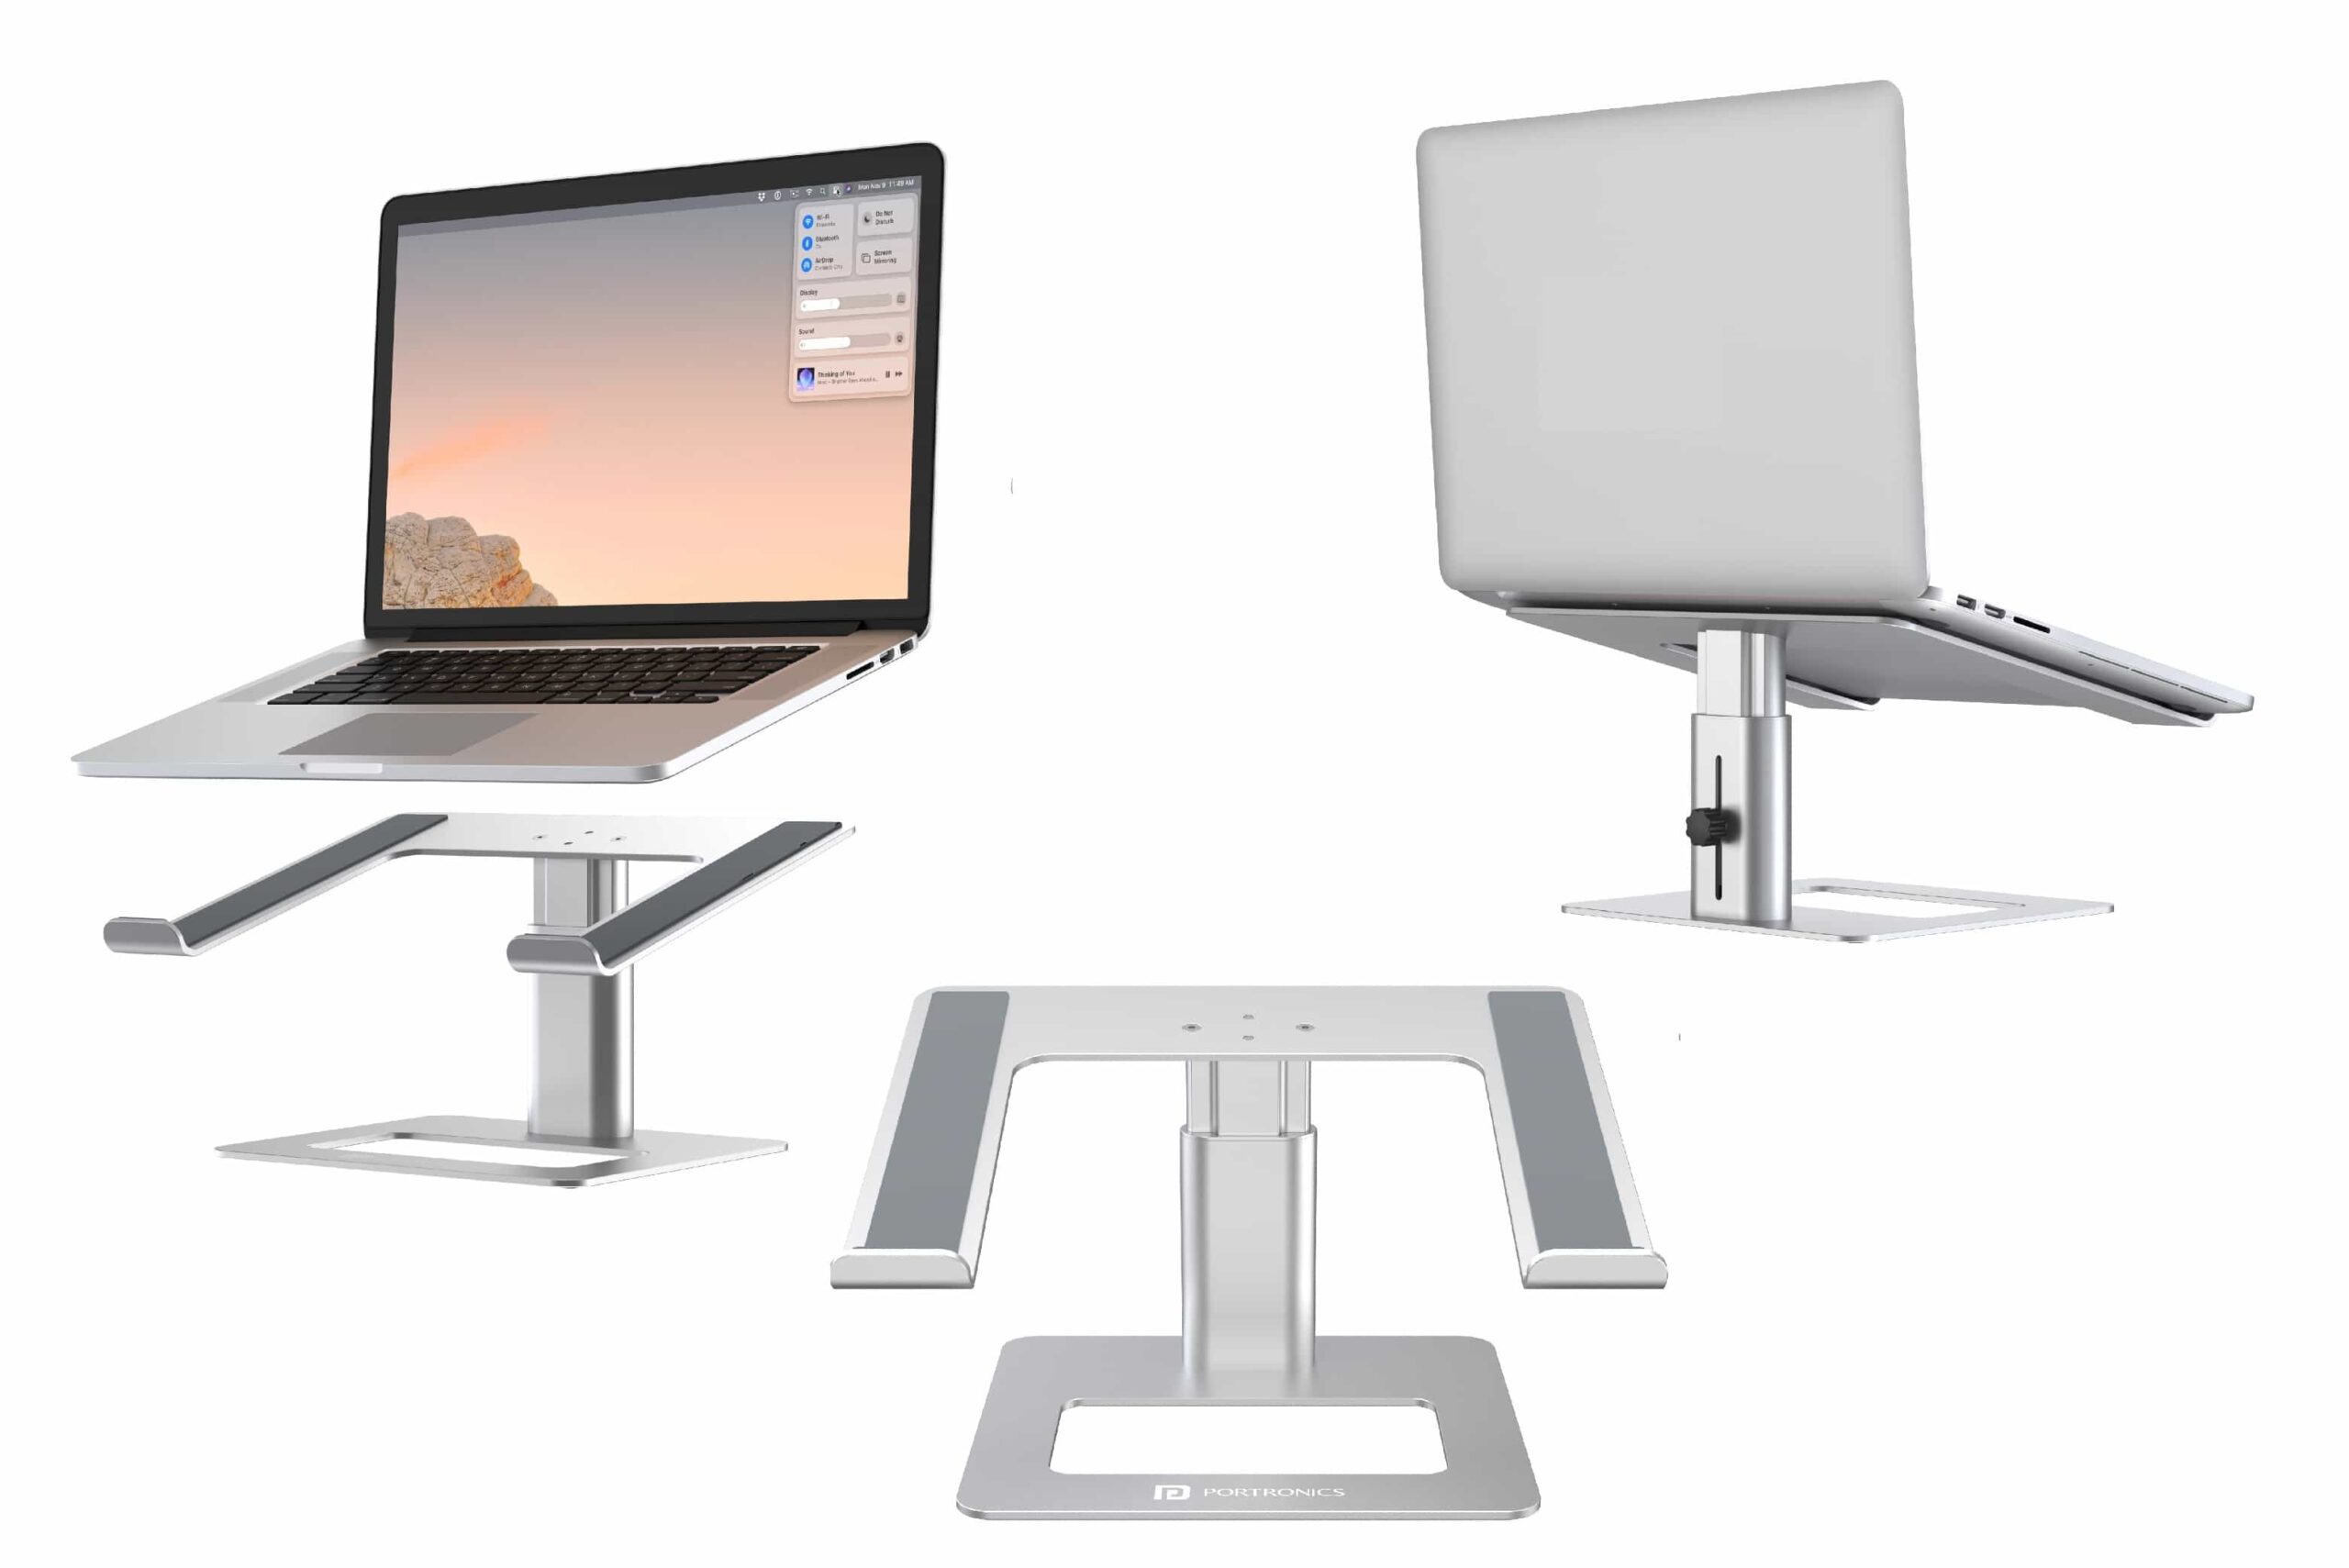 Portronics Launches ‘My Buddy K5 Portable Laptop Stand